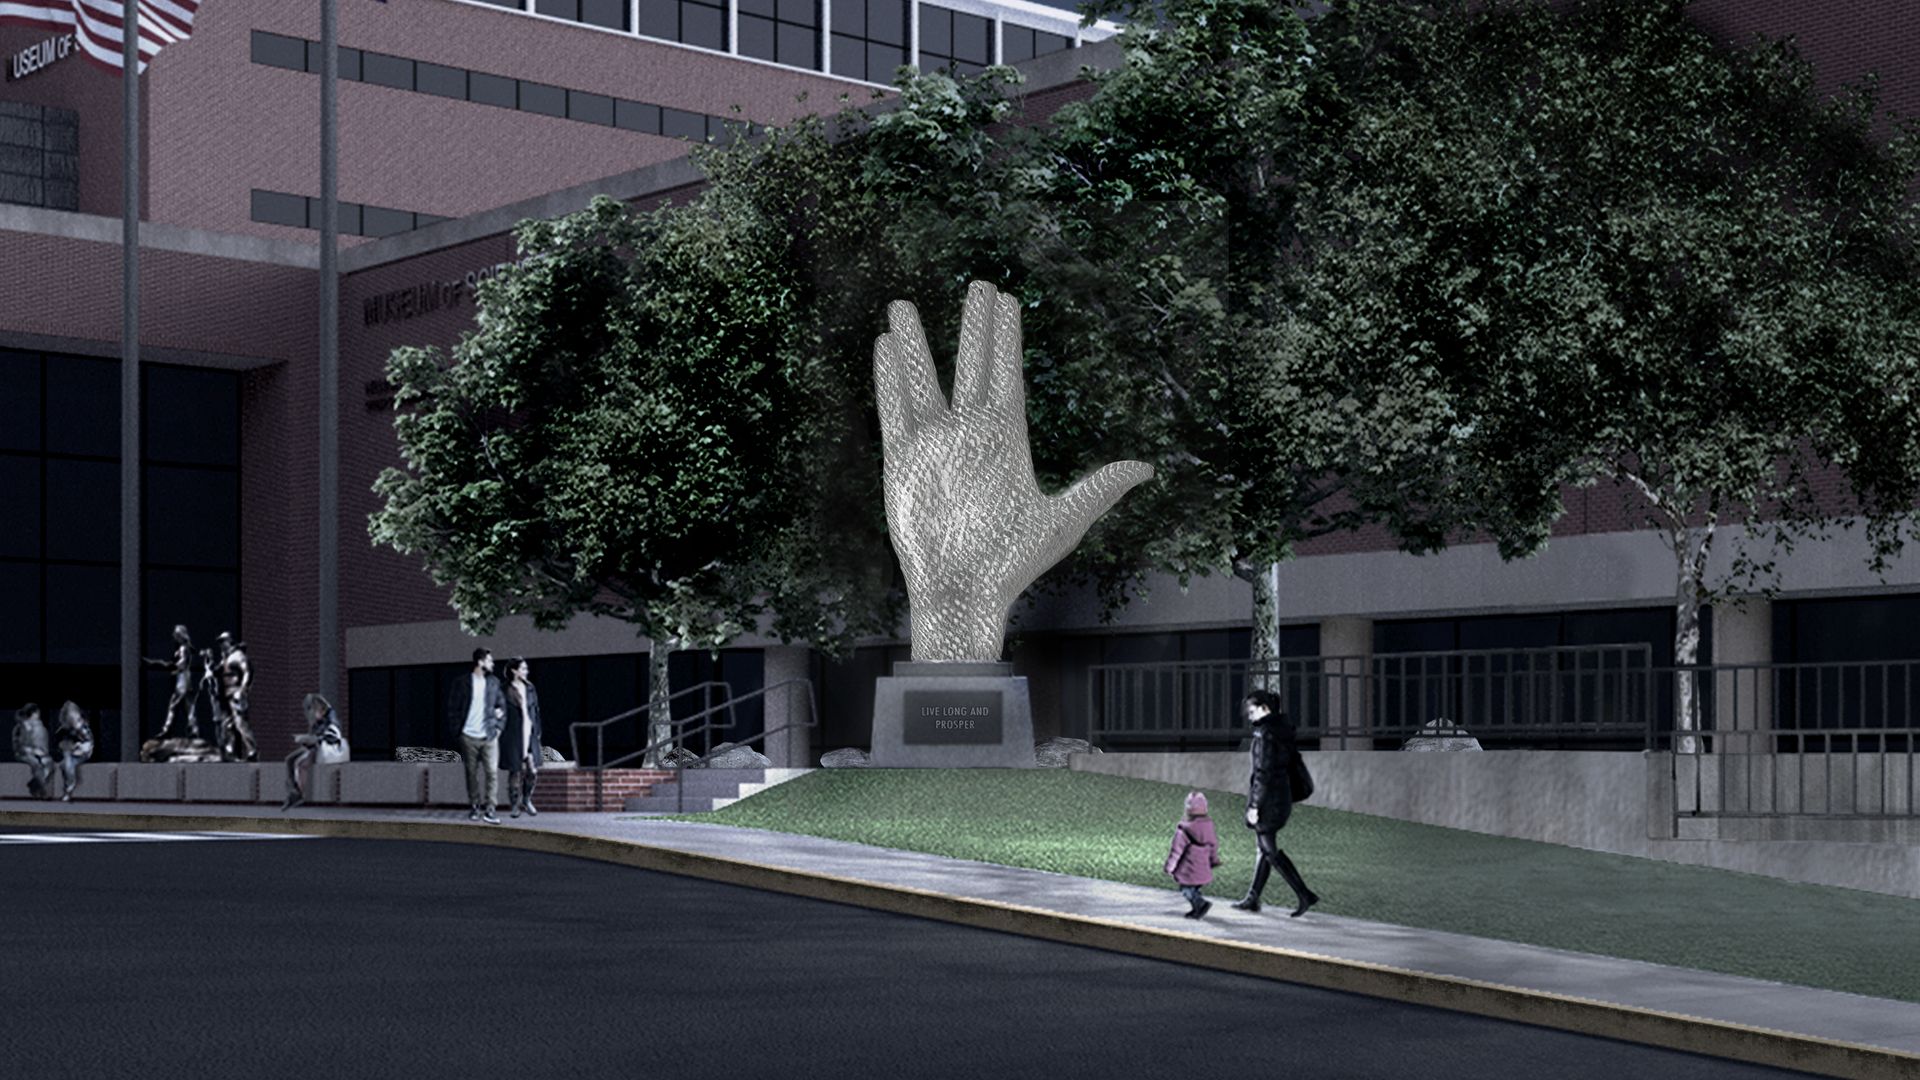 A rendering of a sculpture to be built at Boston's Museum of Science honoring Star Trek actor Leonard Nimoy